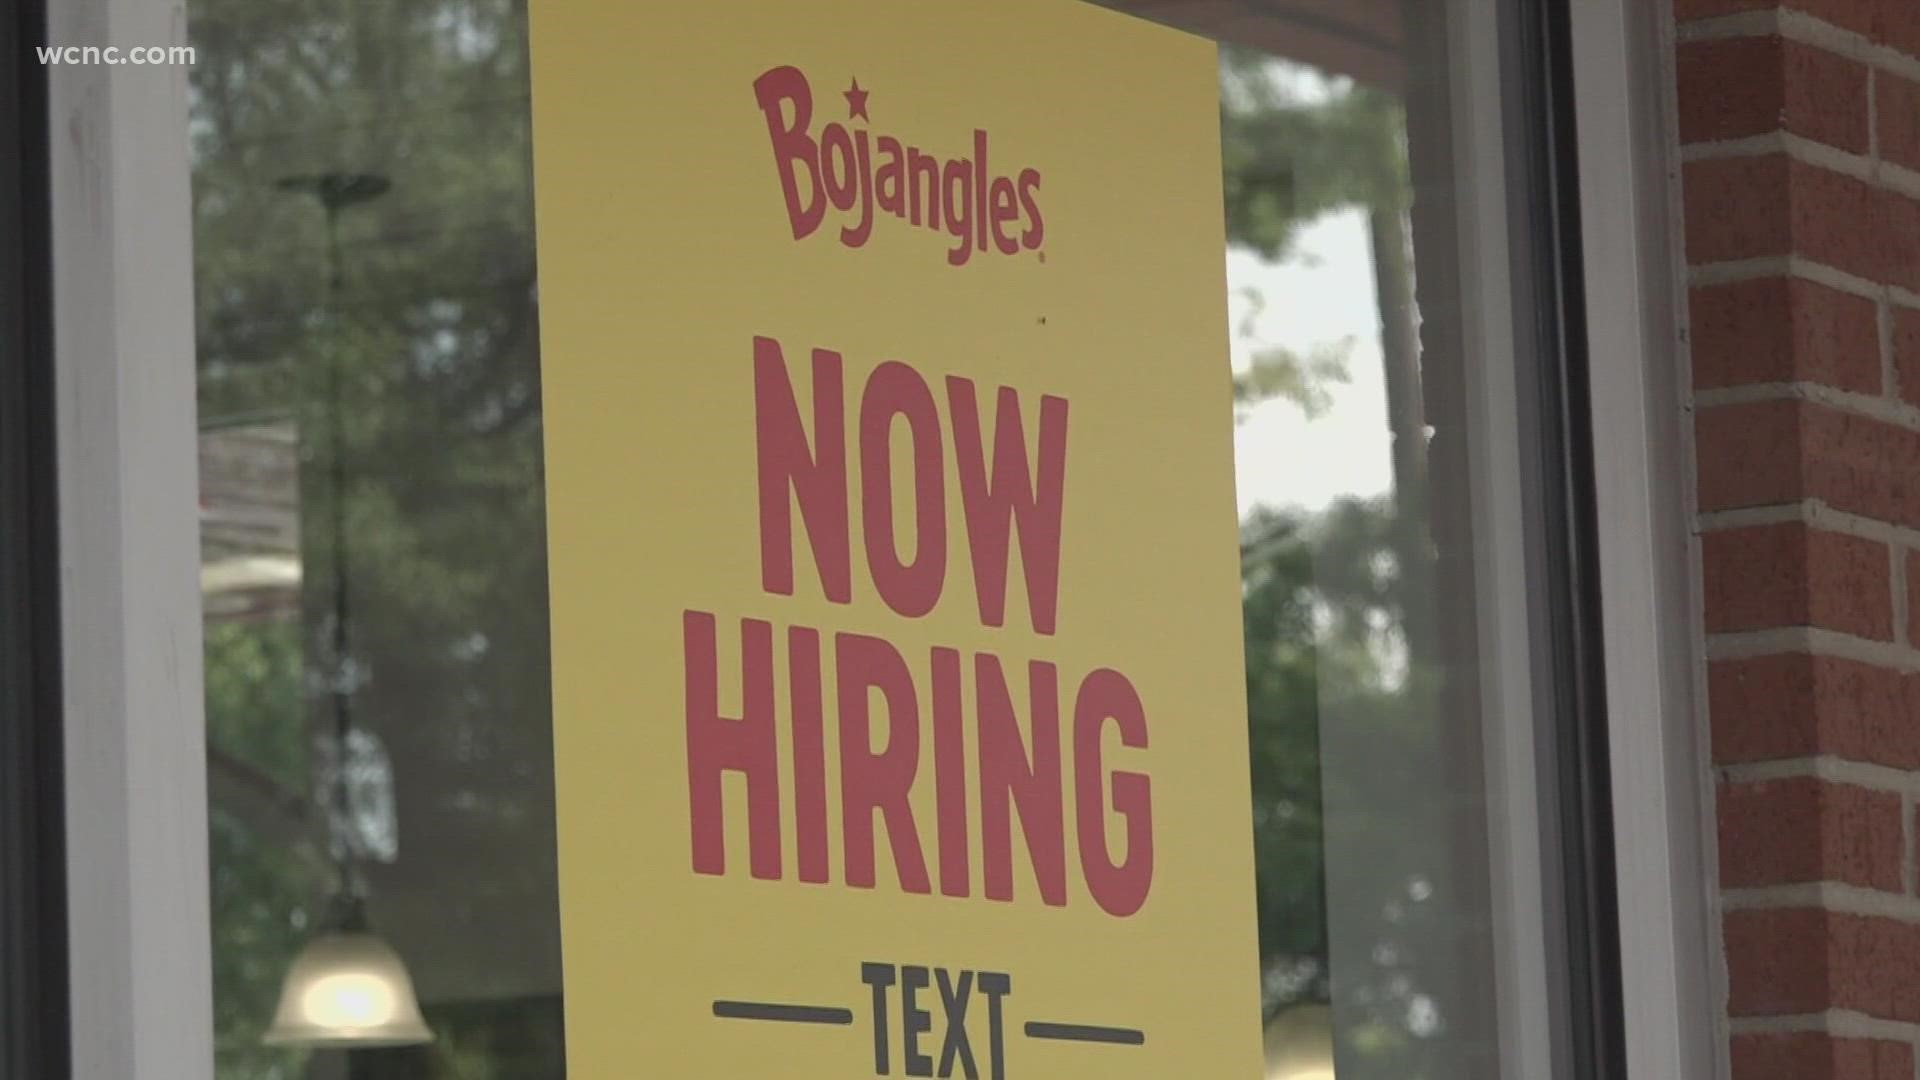 Looking for a job this holiday season? Charlotte restaurant chain Bojangles is hiring for hundreds of positions at restaurants across the area.